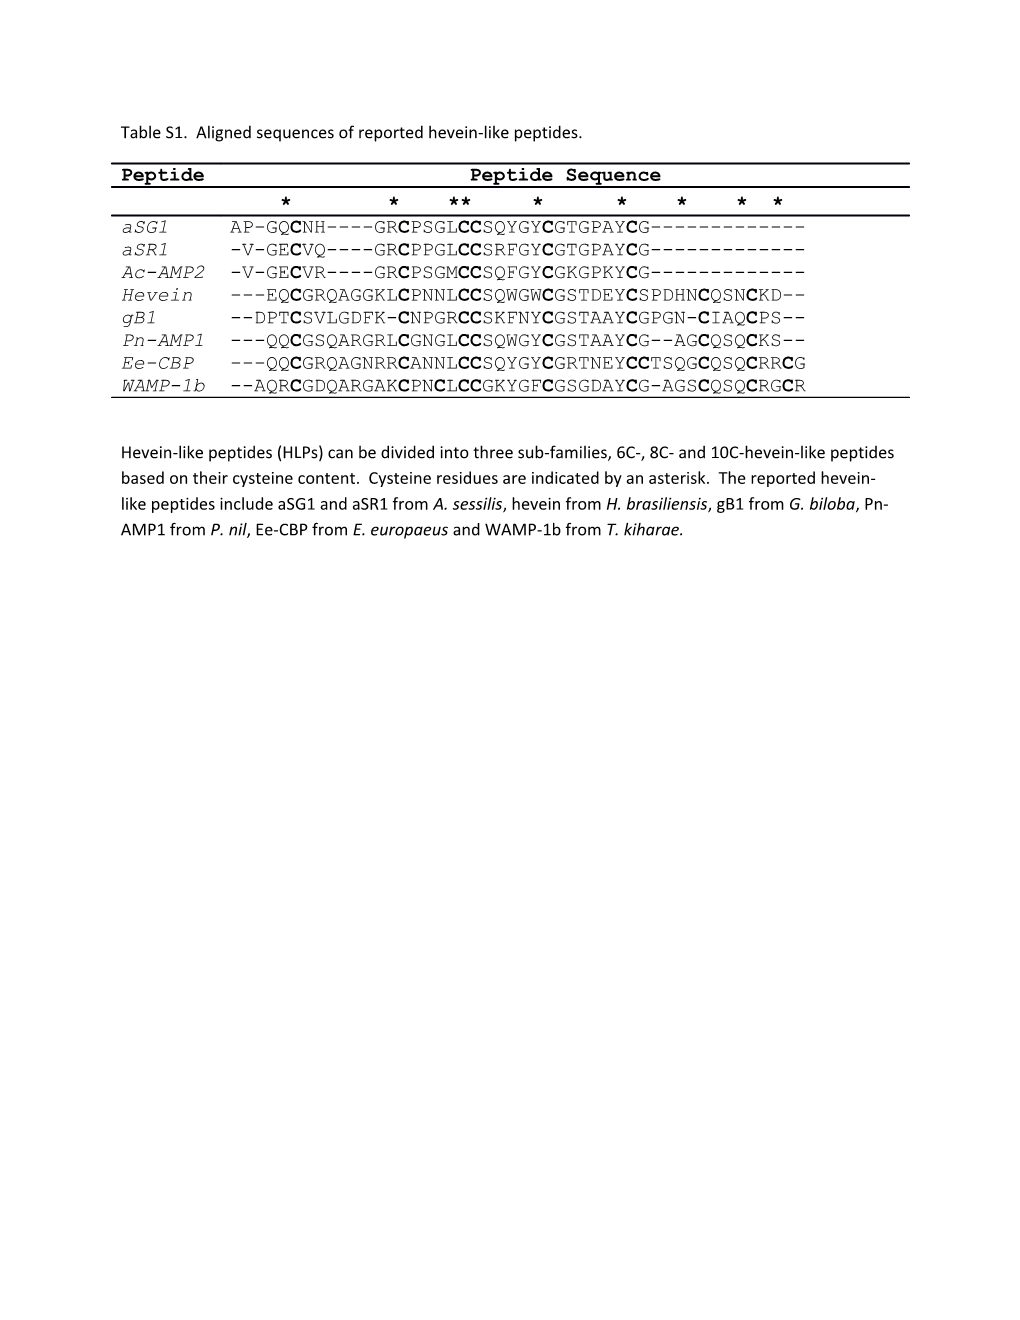 Table S1. Aligned Sequences of Reported Hevein-Like Peptides